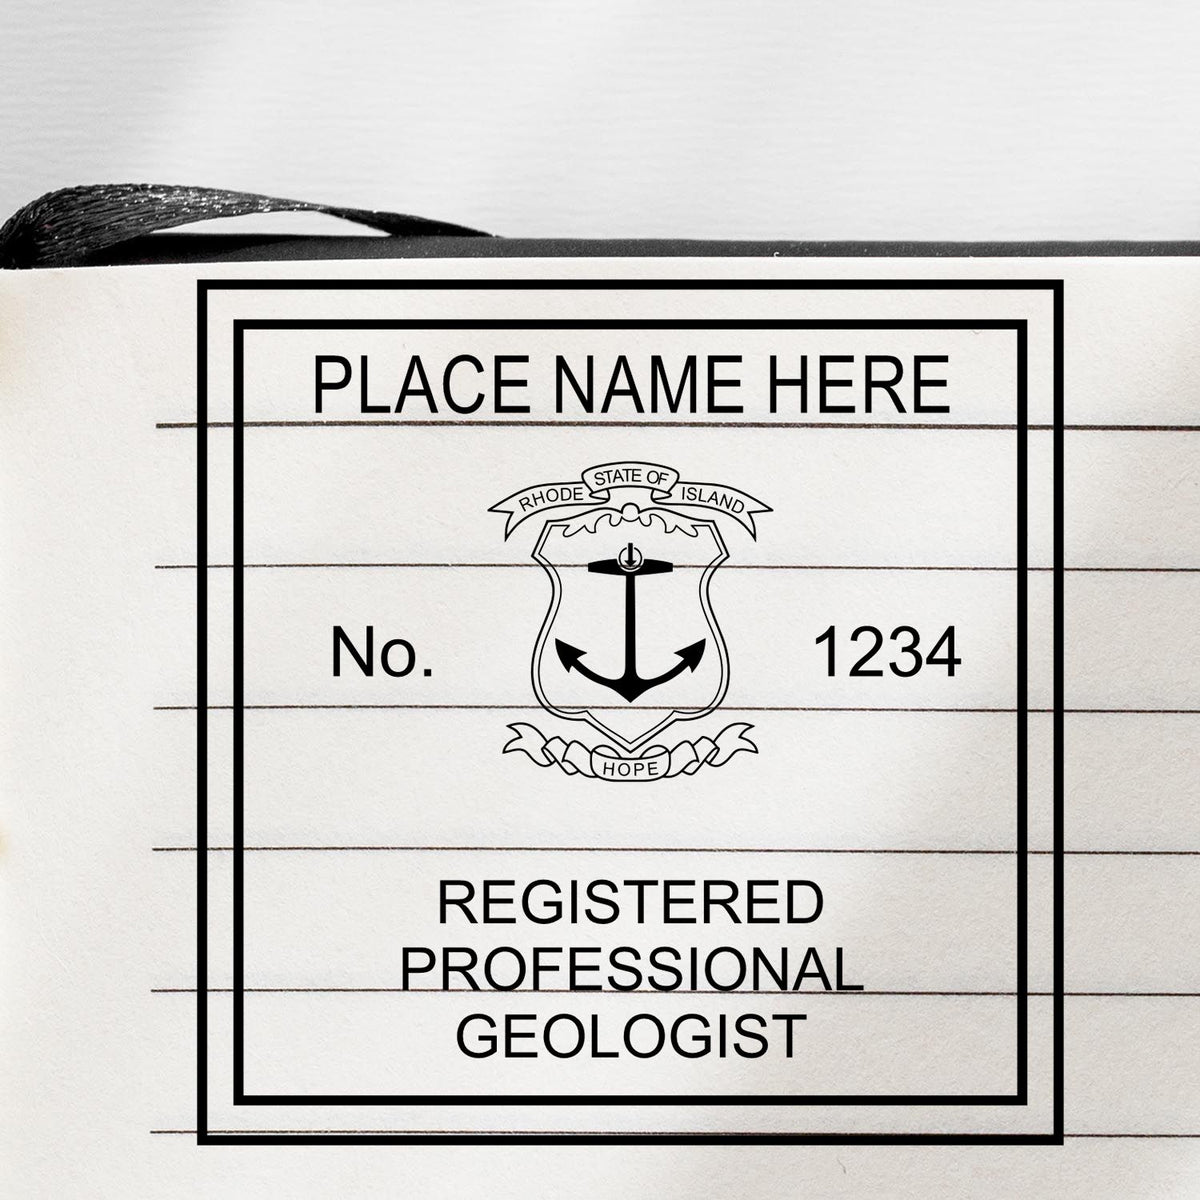 The Rhode Island Professional Geologist Seal Stamp stamp impression comes to life with a crisp, detailed image stamped on paper - showcasing true professional quality.